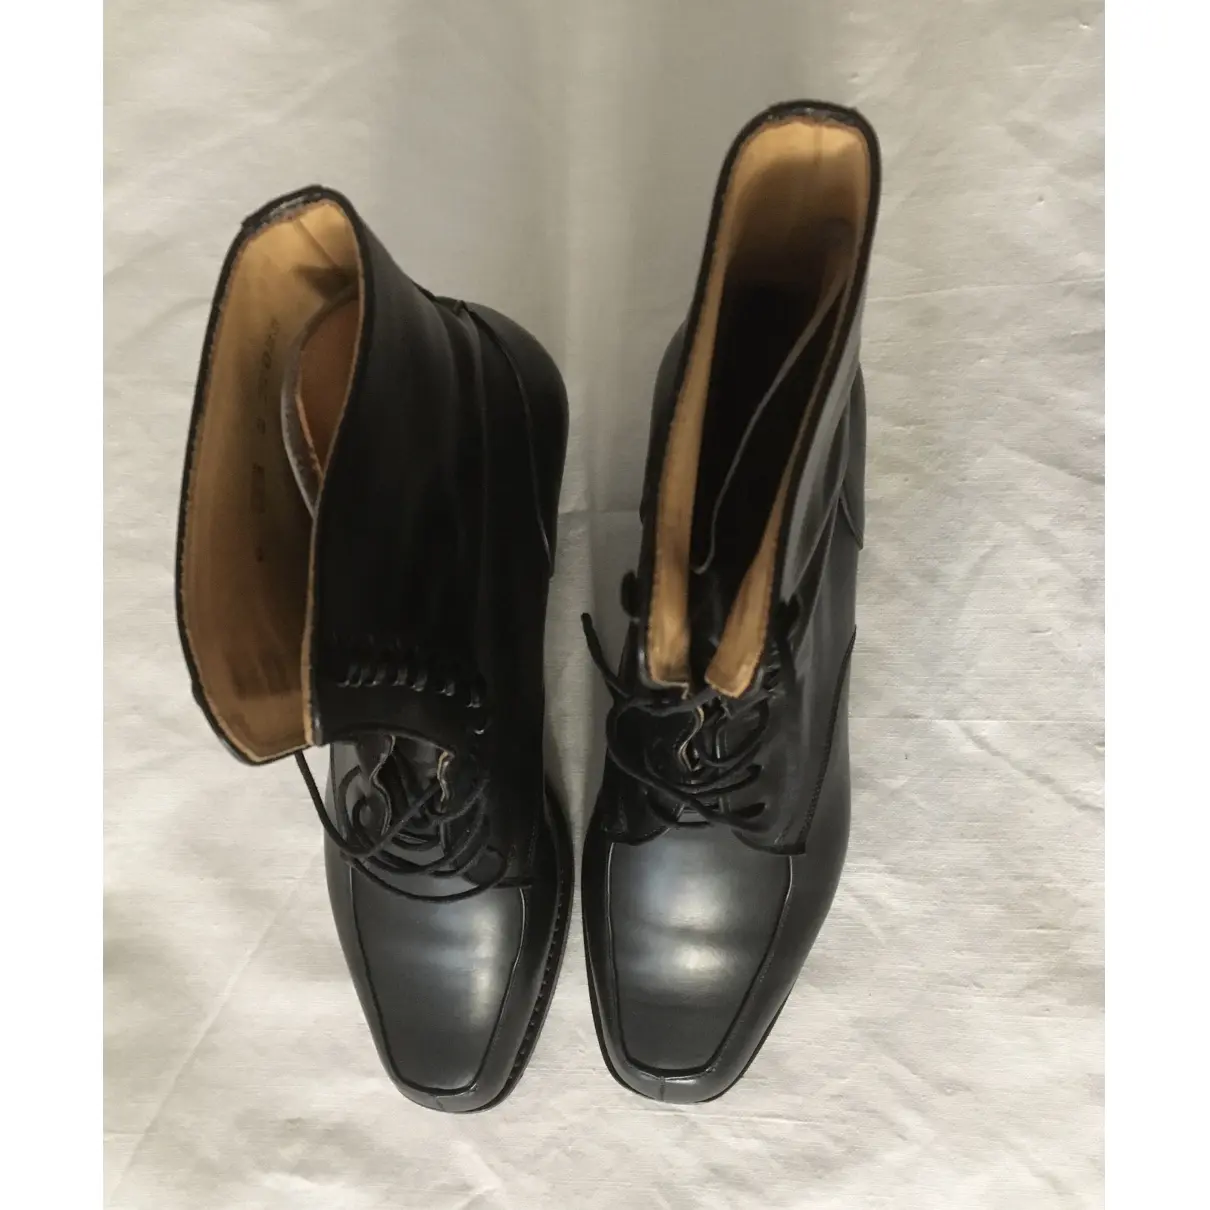 Ludwig Reiter Leather lace up boots for sale - Vintage